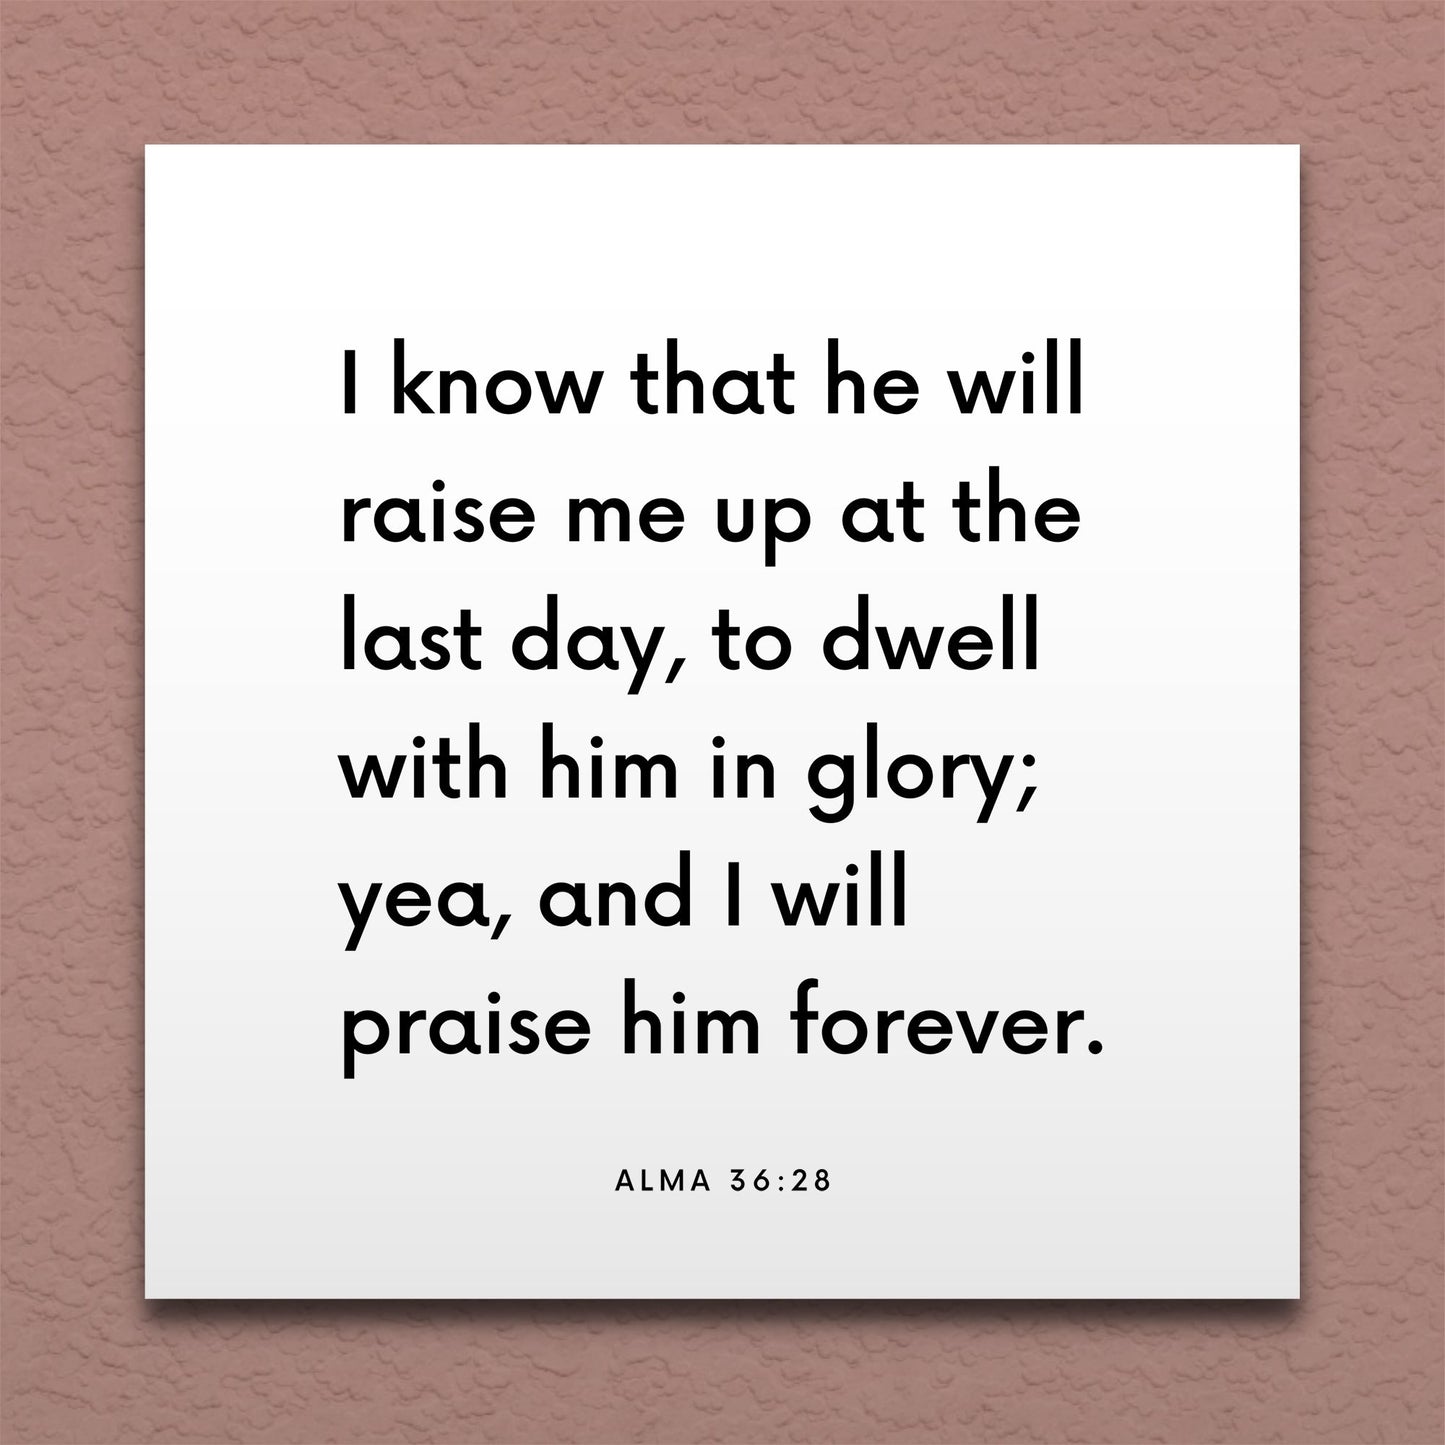 Wall-mounted scripture tile for Alma 36:28 - "I know that he will raise me up at the last day"